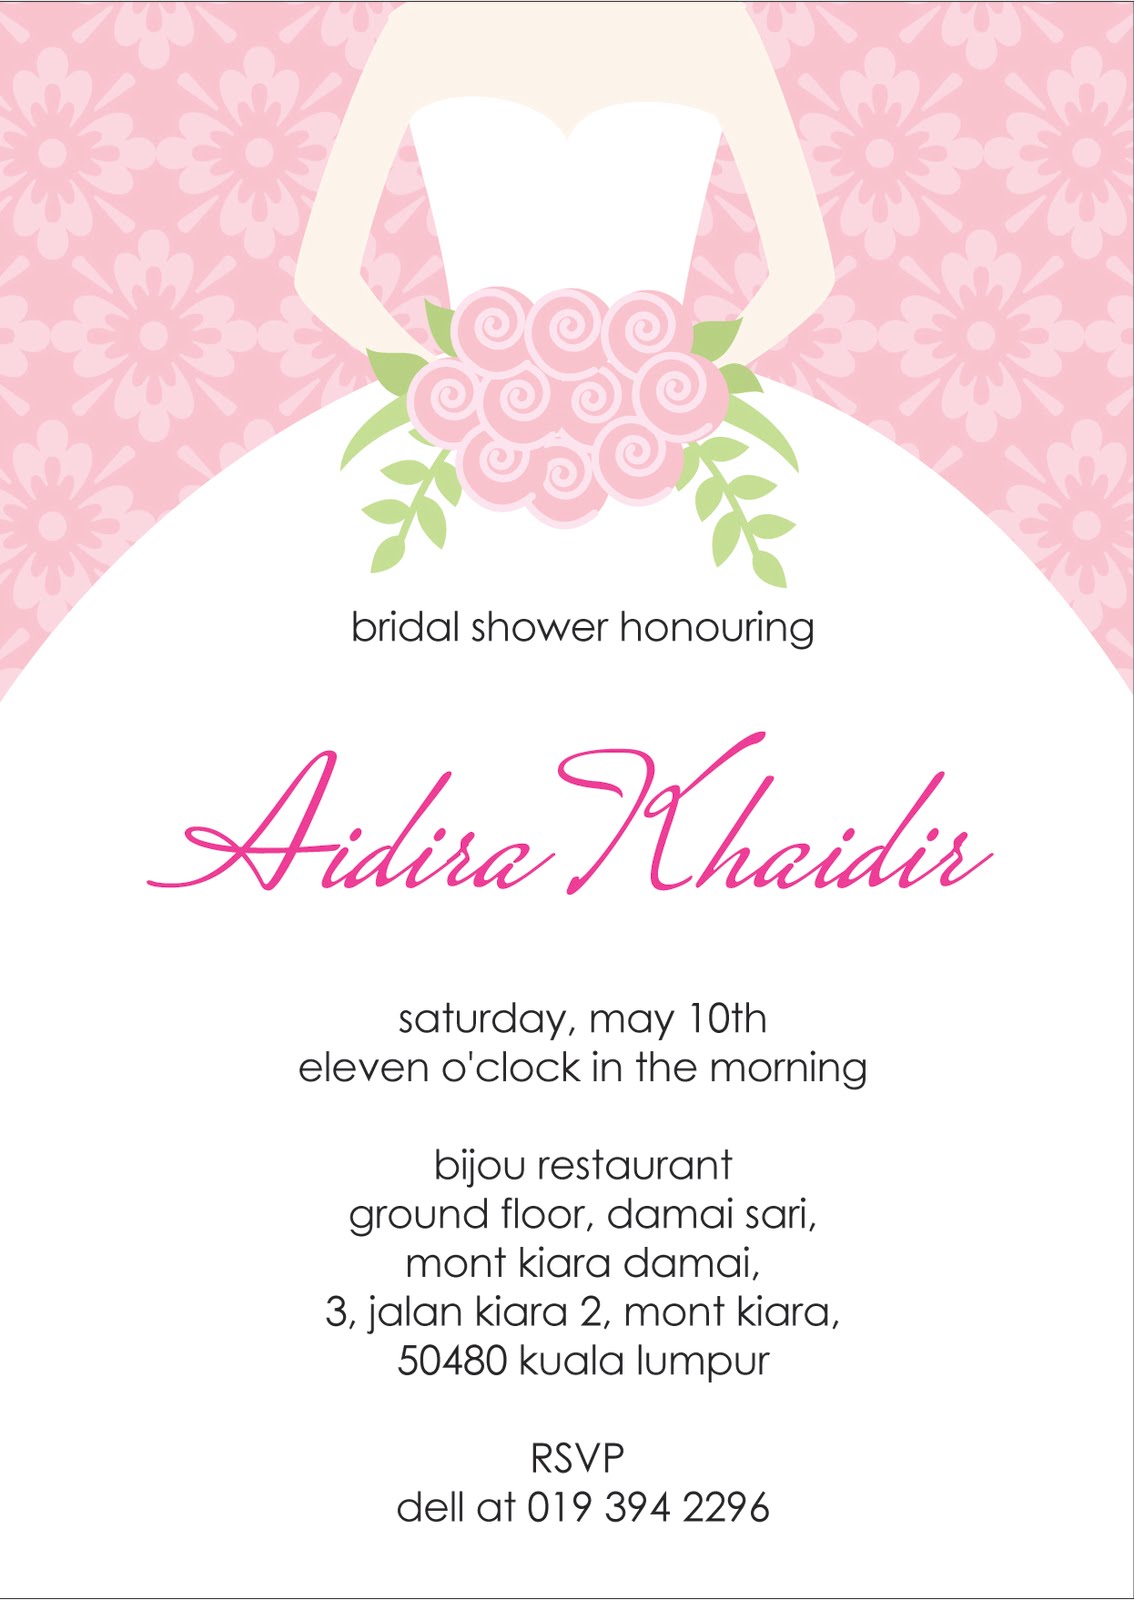 Your one-stop wedding centre - gifts, deco, favors and such!: Bridal Shower Invitation Card